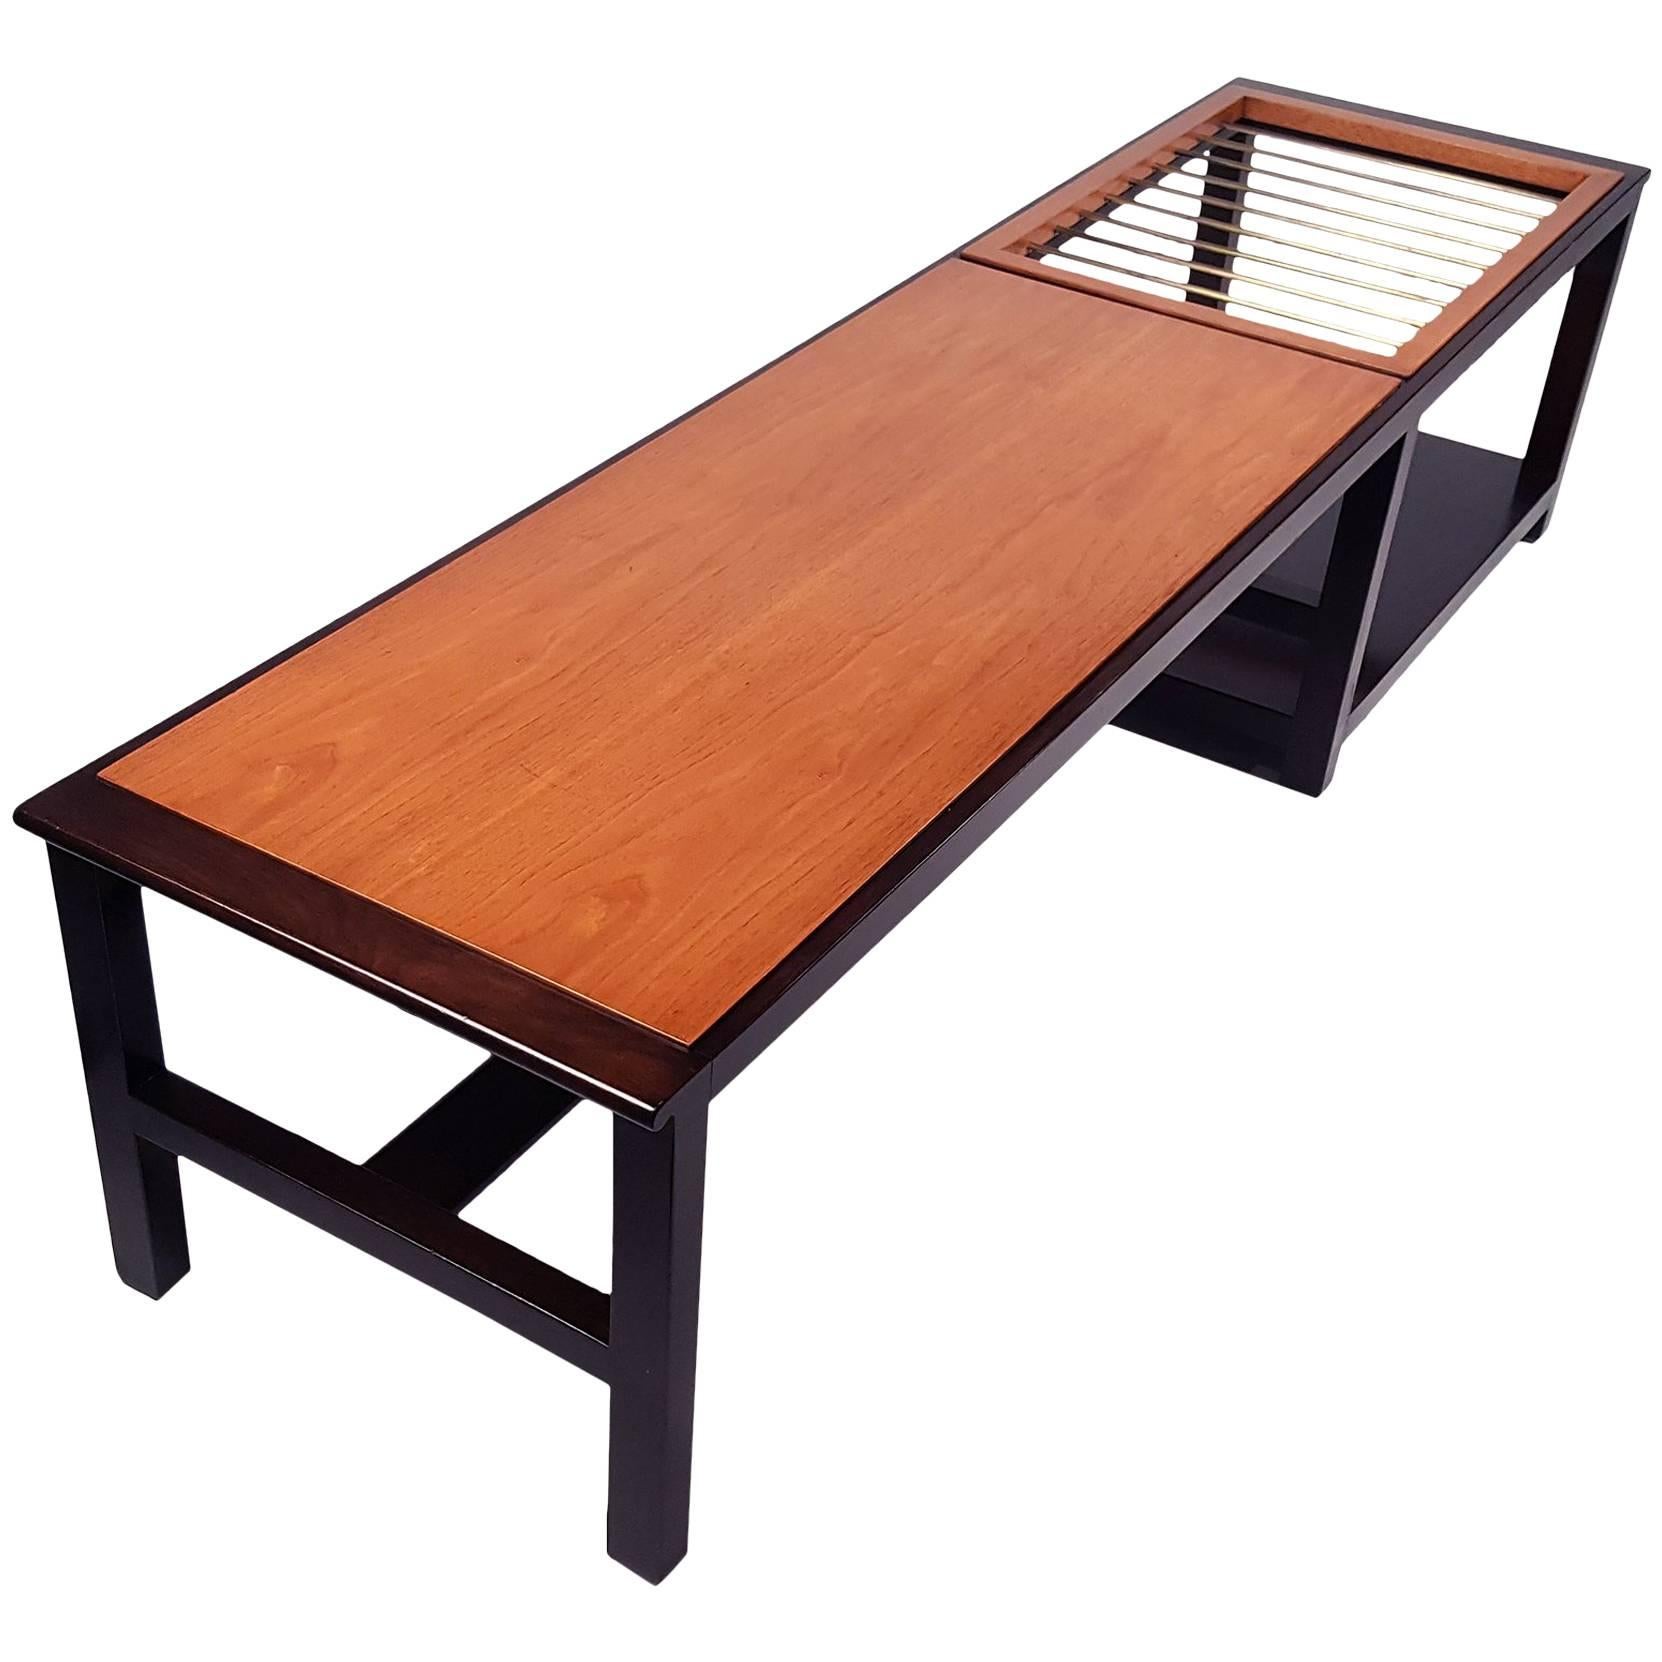 Edward Wormley for Dunbar Table or Bench with Magazine Display